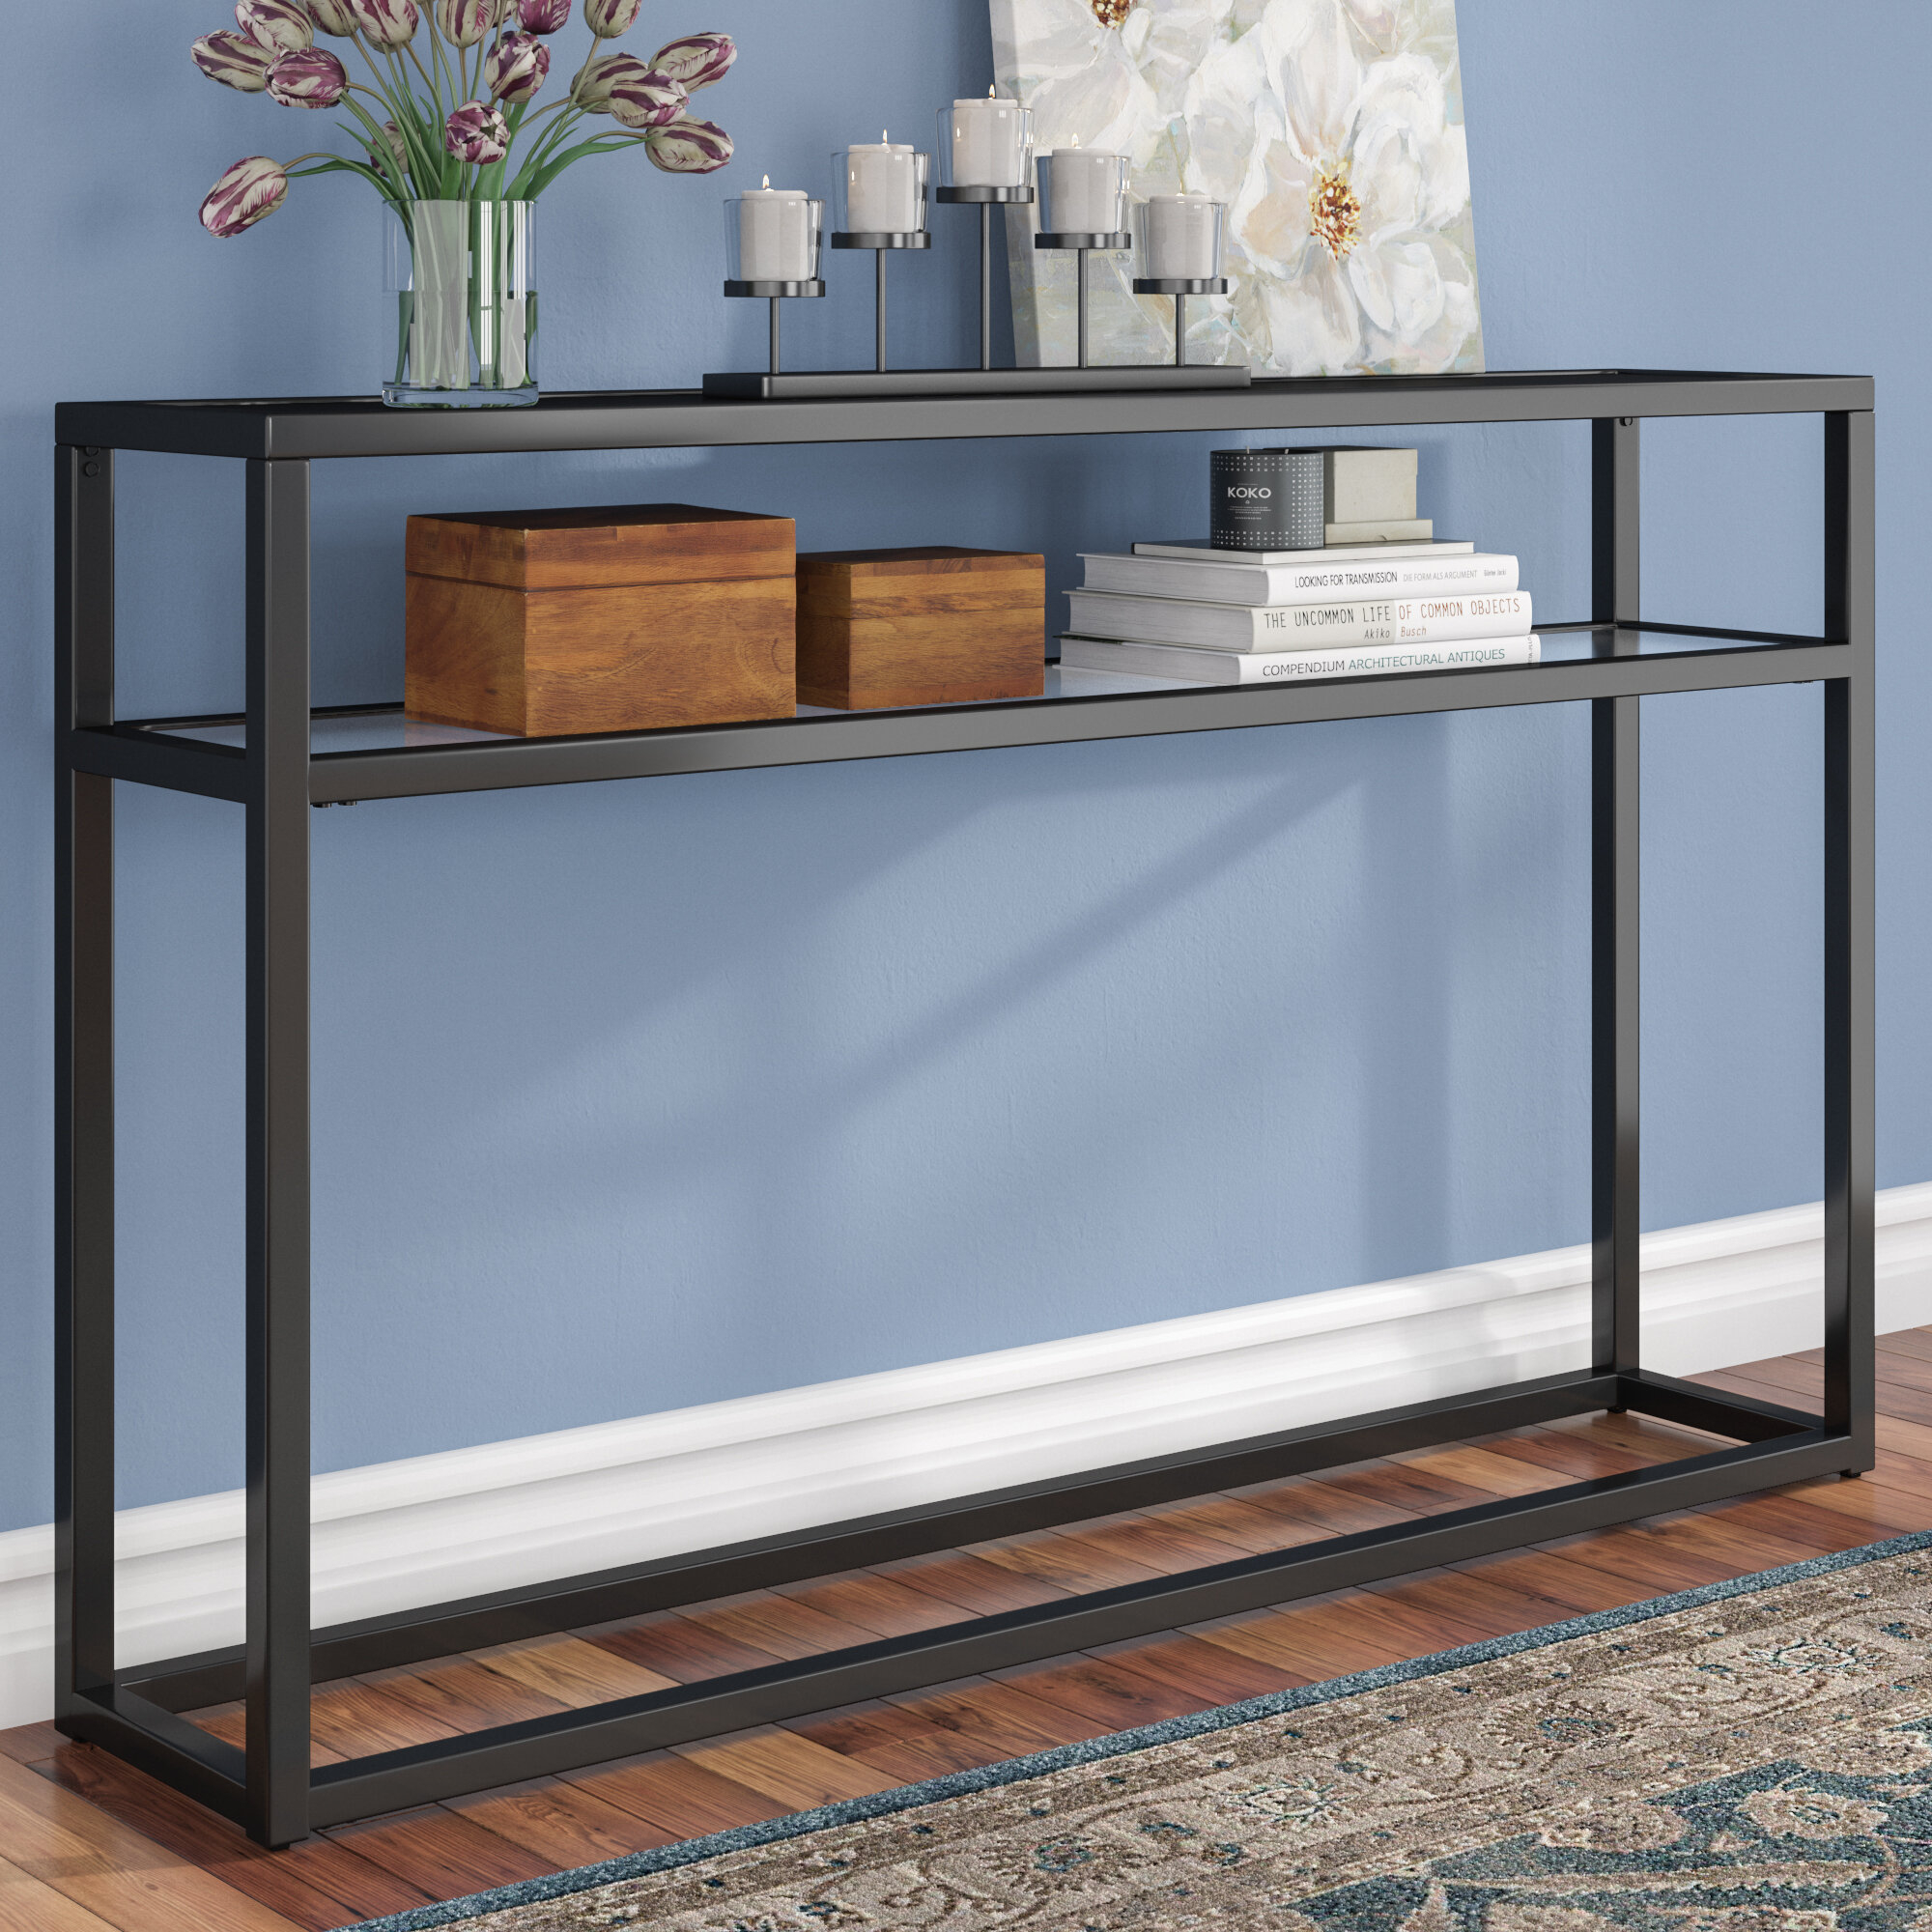 72 Inch Console Table Visualhunt, Wayfair Sofa Table Cabinet